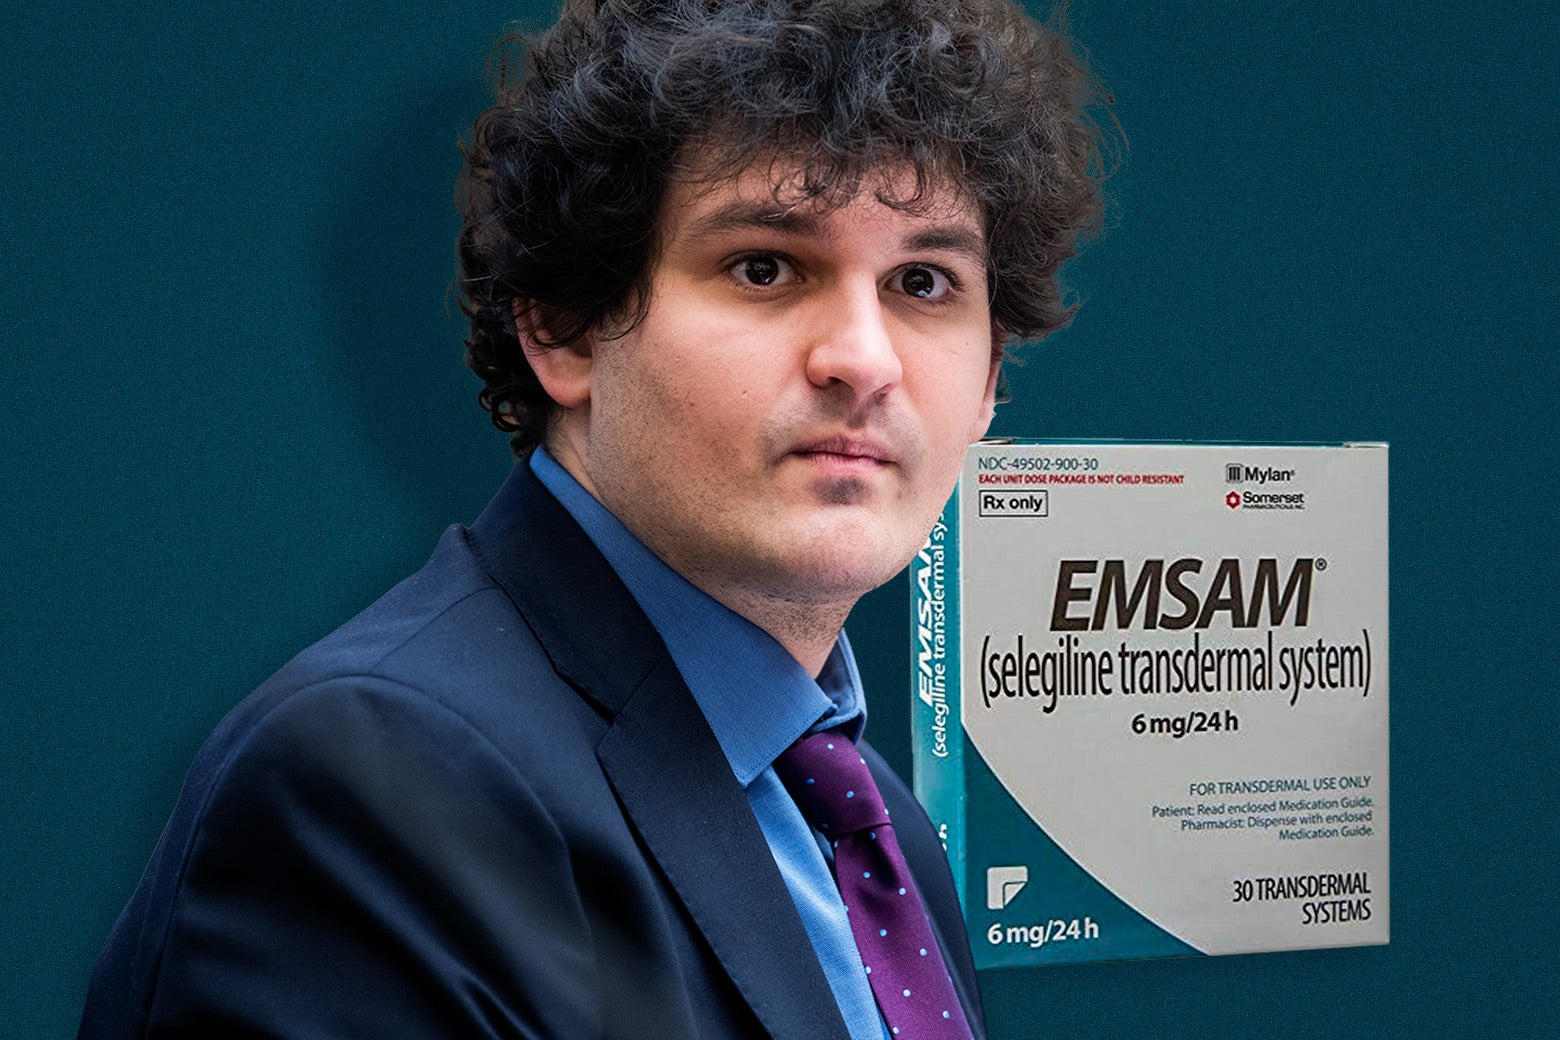 Sam Bankman-Fried, pictured in a suit, next to an Emsam package.